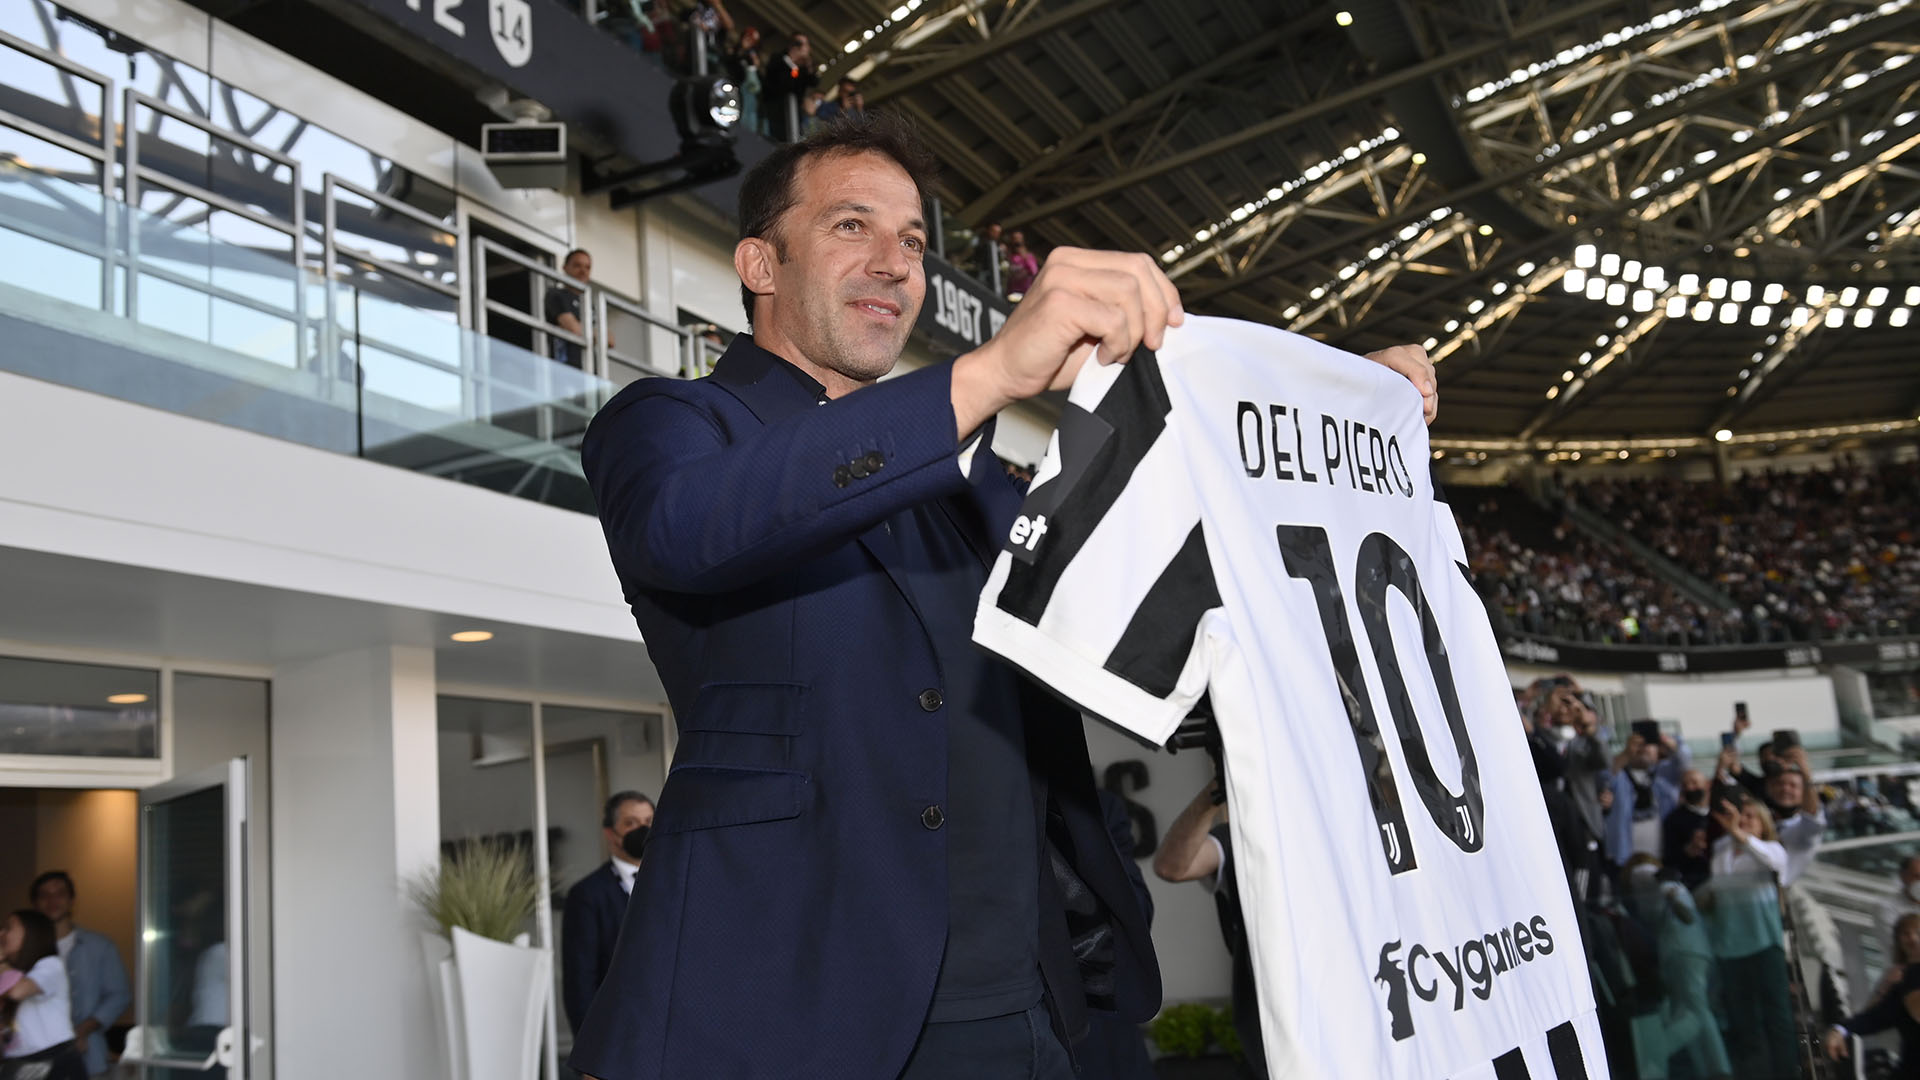 Del Piero has flown to Saudi Arabian capital of Riyadh to sign as Al-Nassr’s next sporting director. The former Juventus captain is all for it as well.